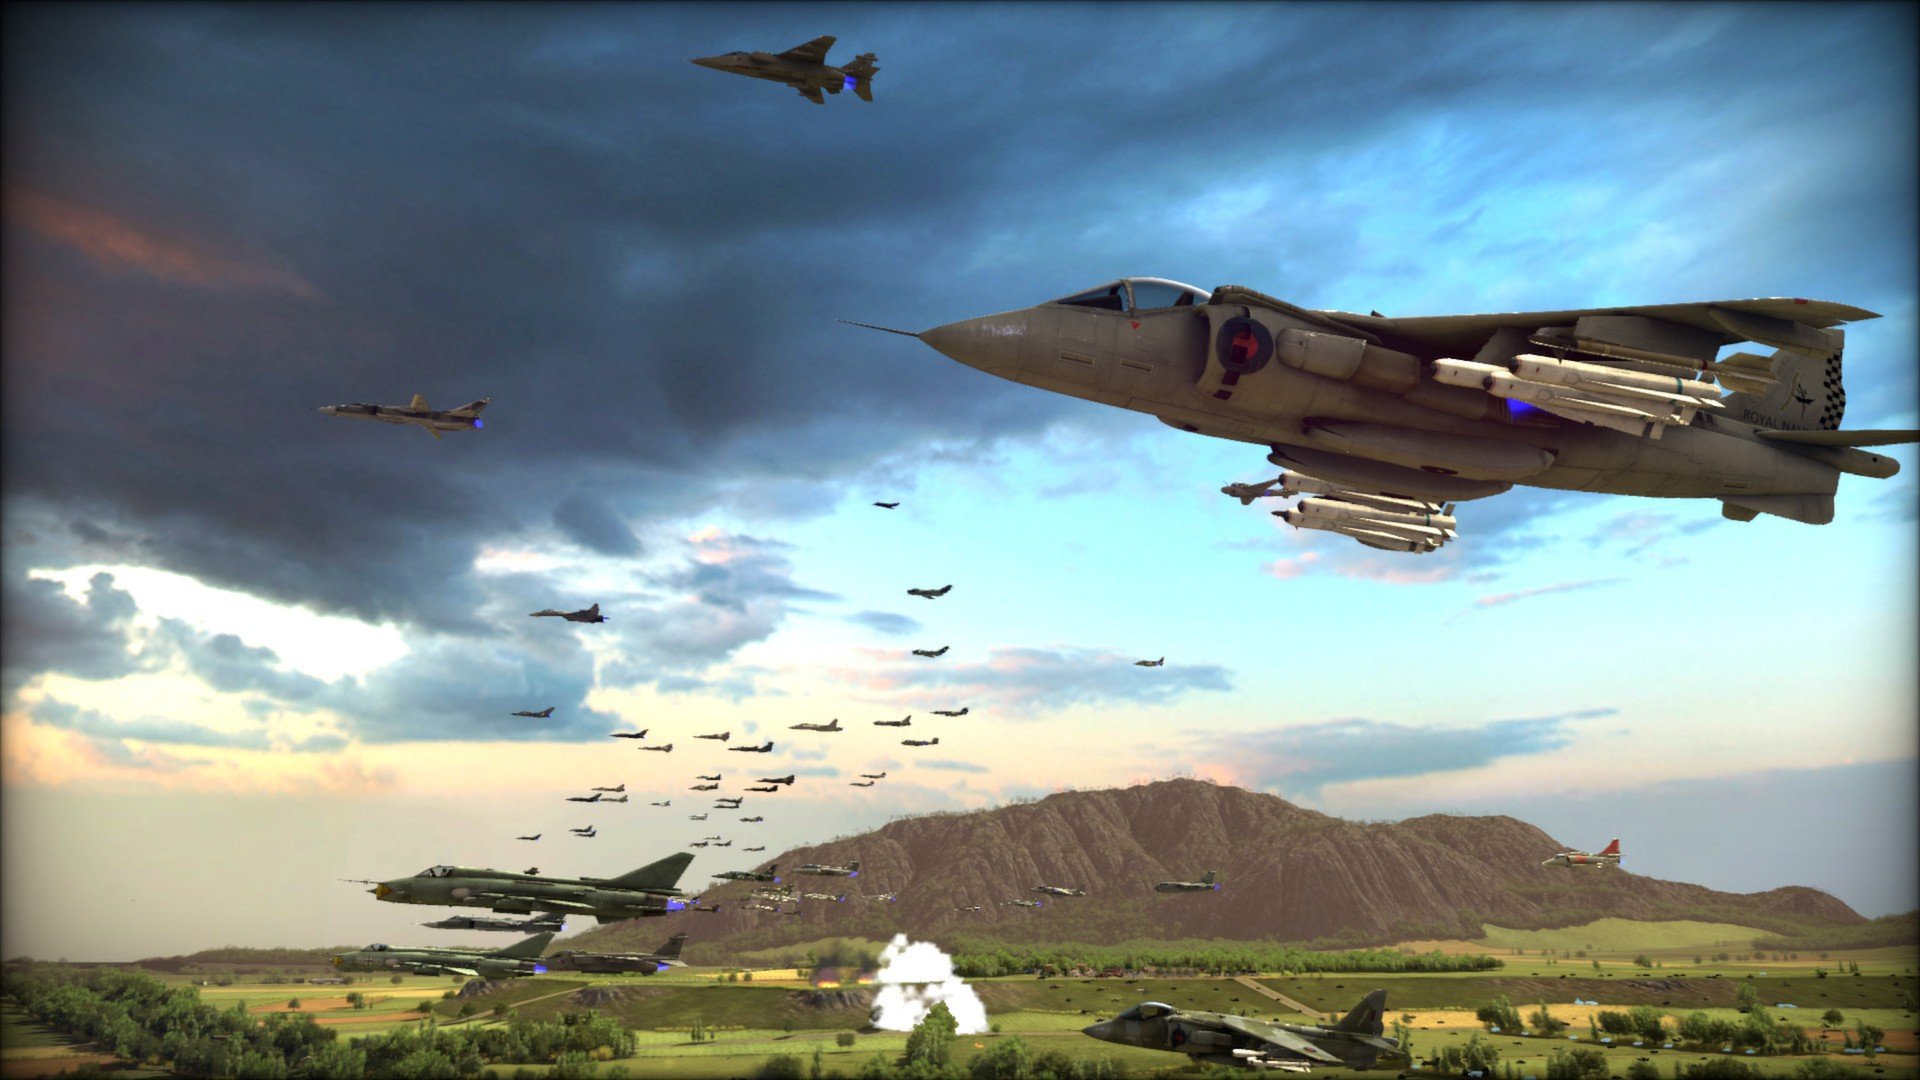 wargame, Game, Video, Military, War, Battle, Wwll, Air, Force, Fighter